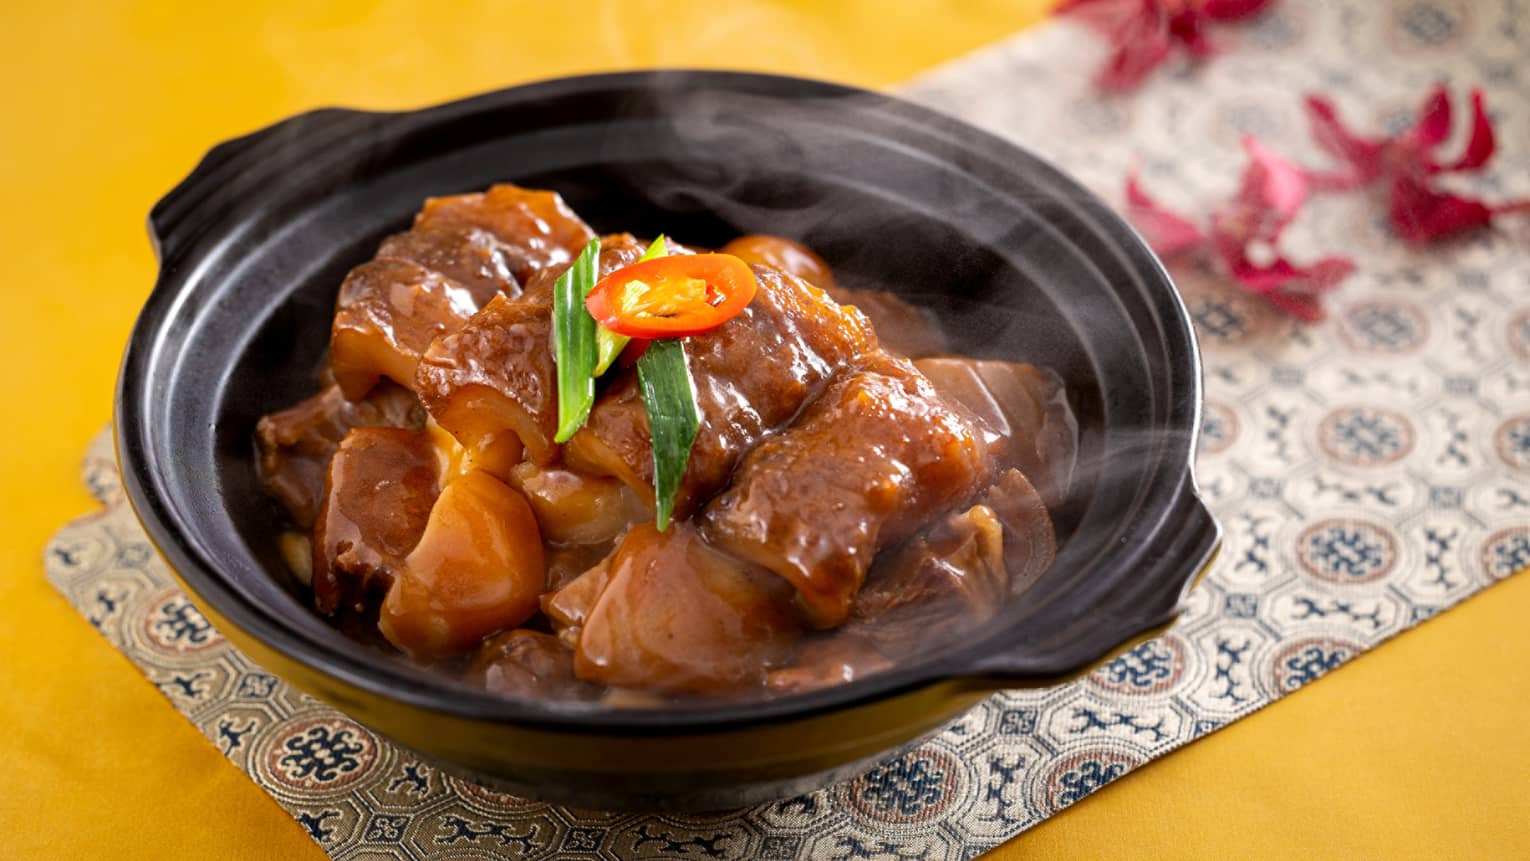 ,A steaming hot meat dish garnished with green onion and chili pepper